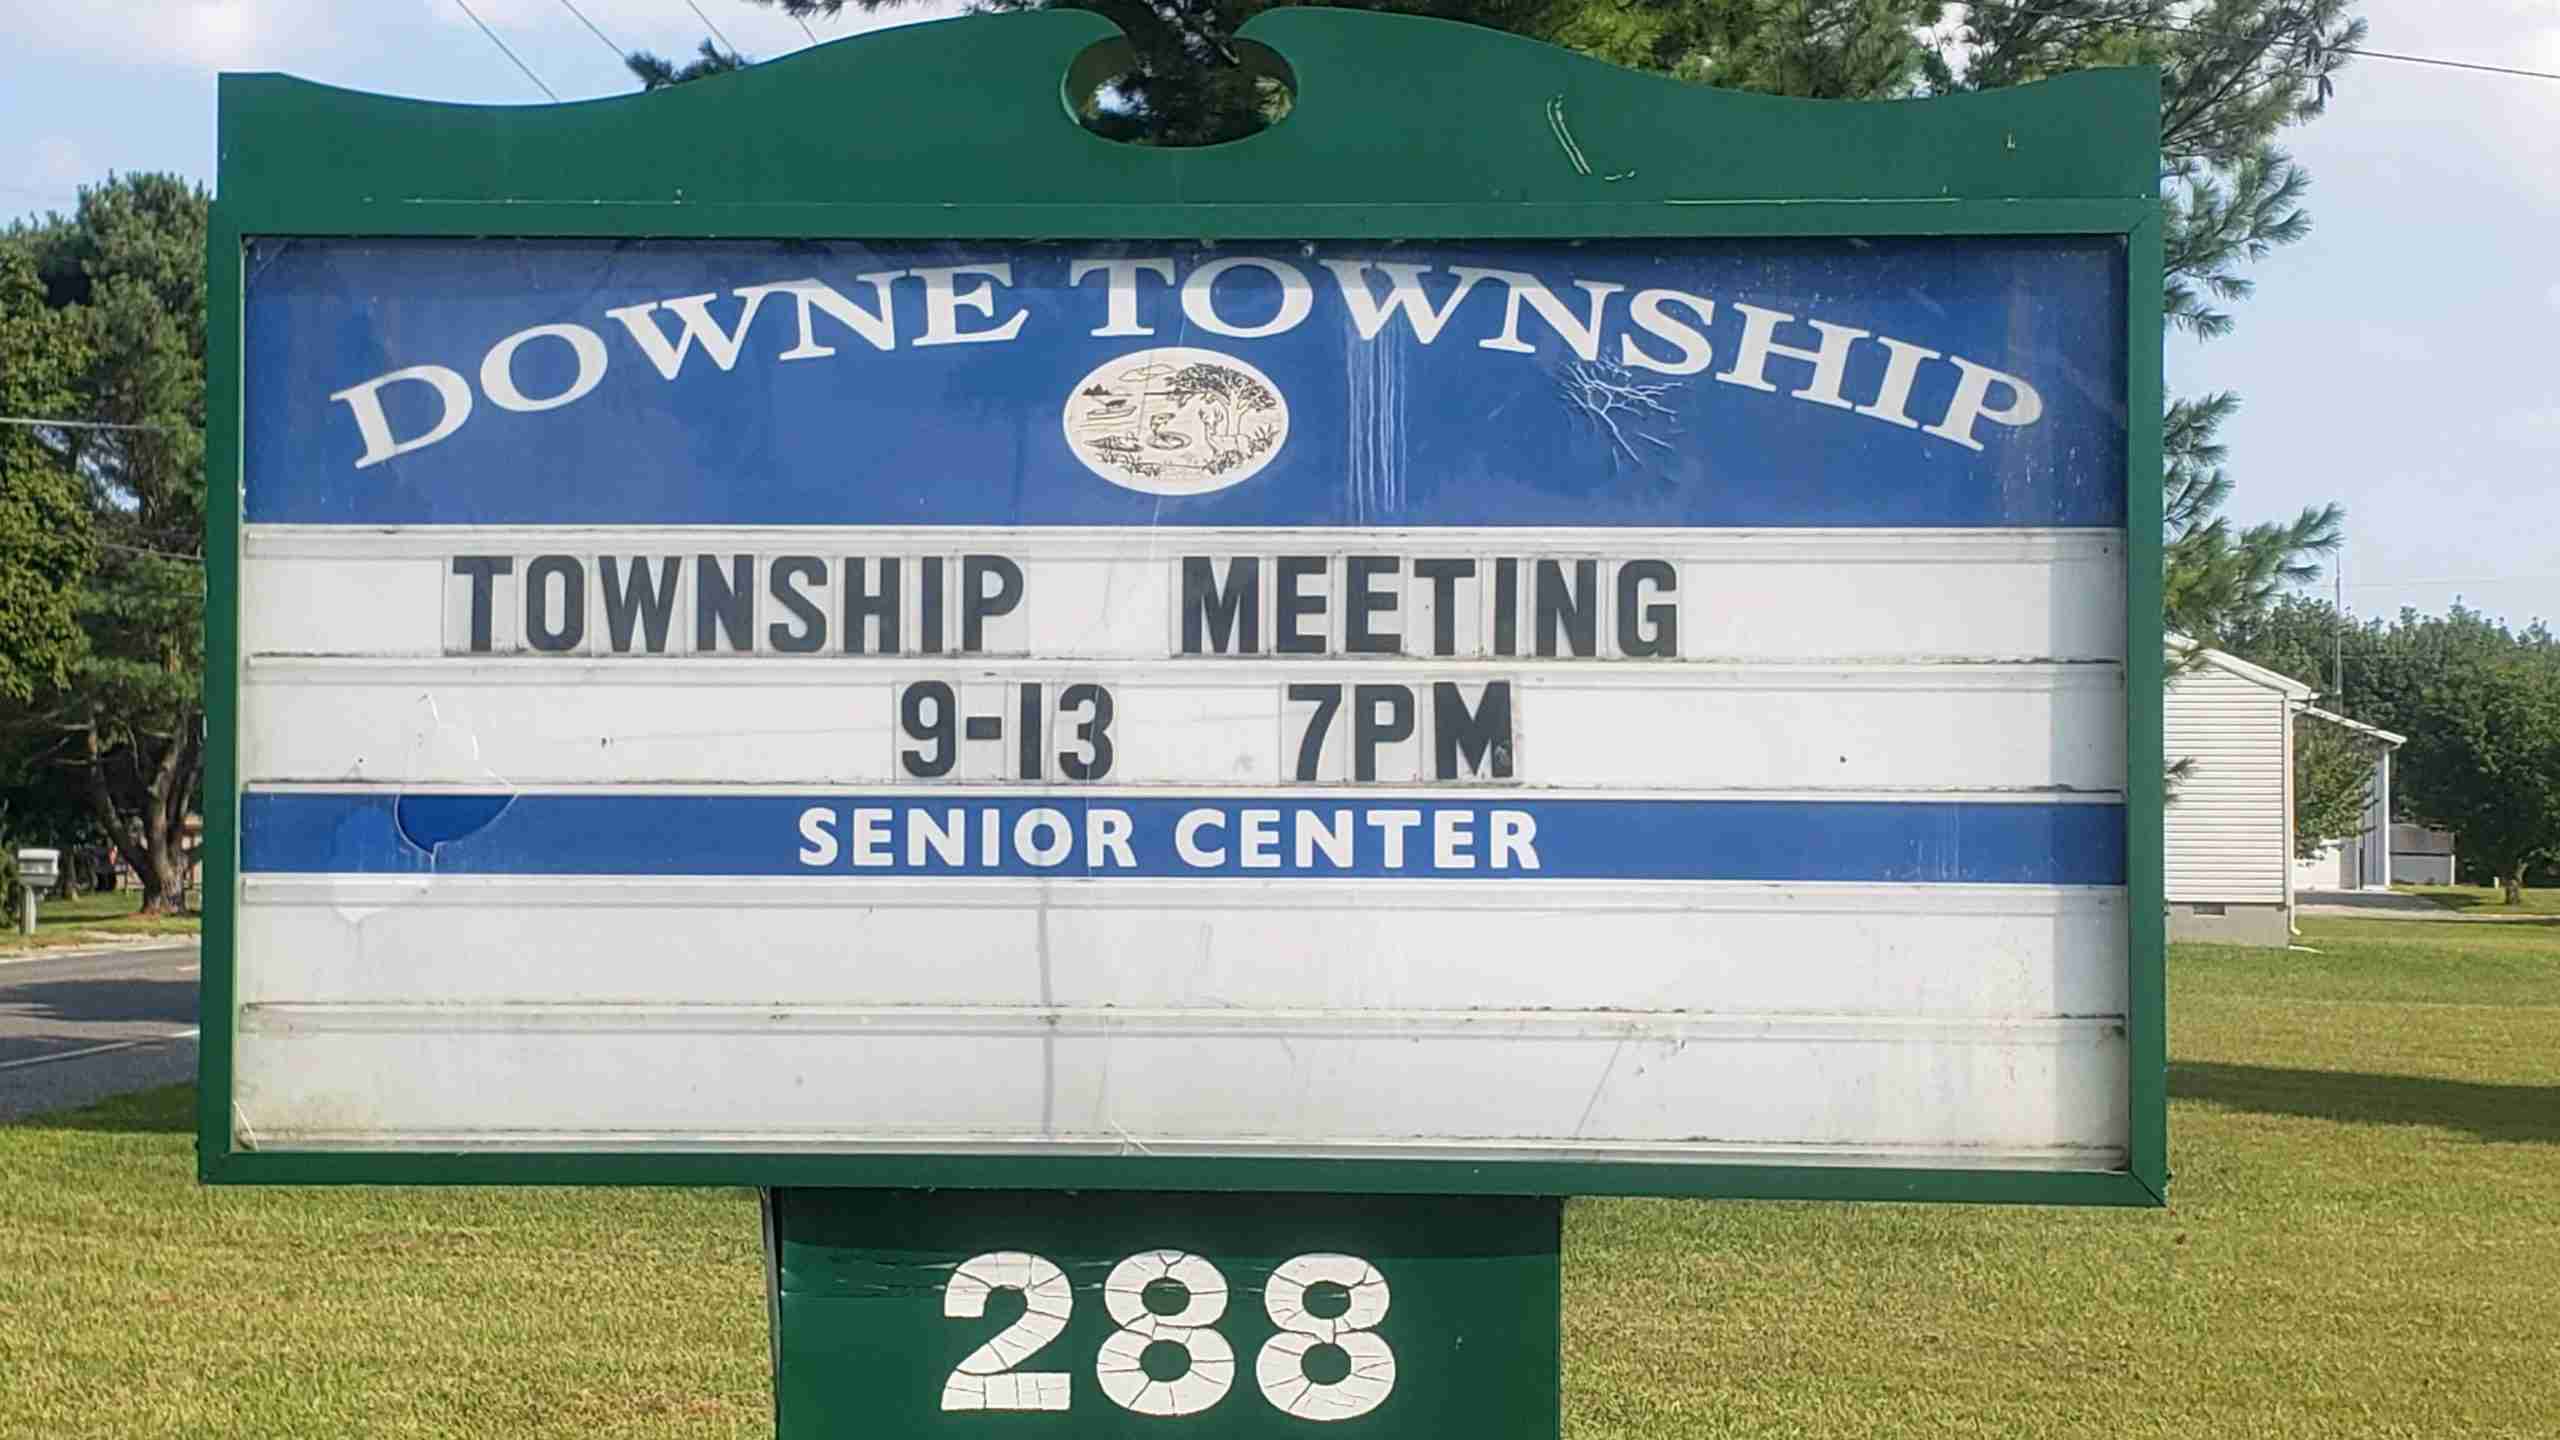 Downe Township agrees to make minutes promptly available